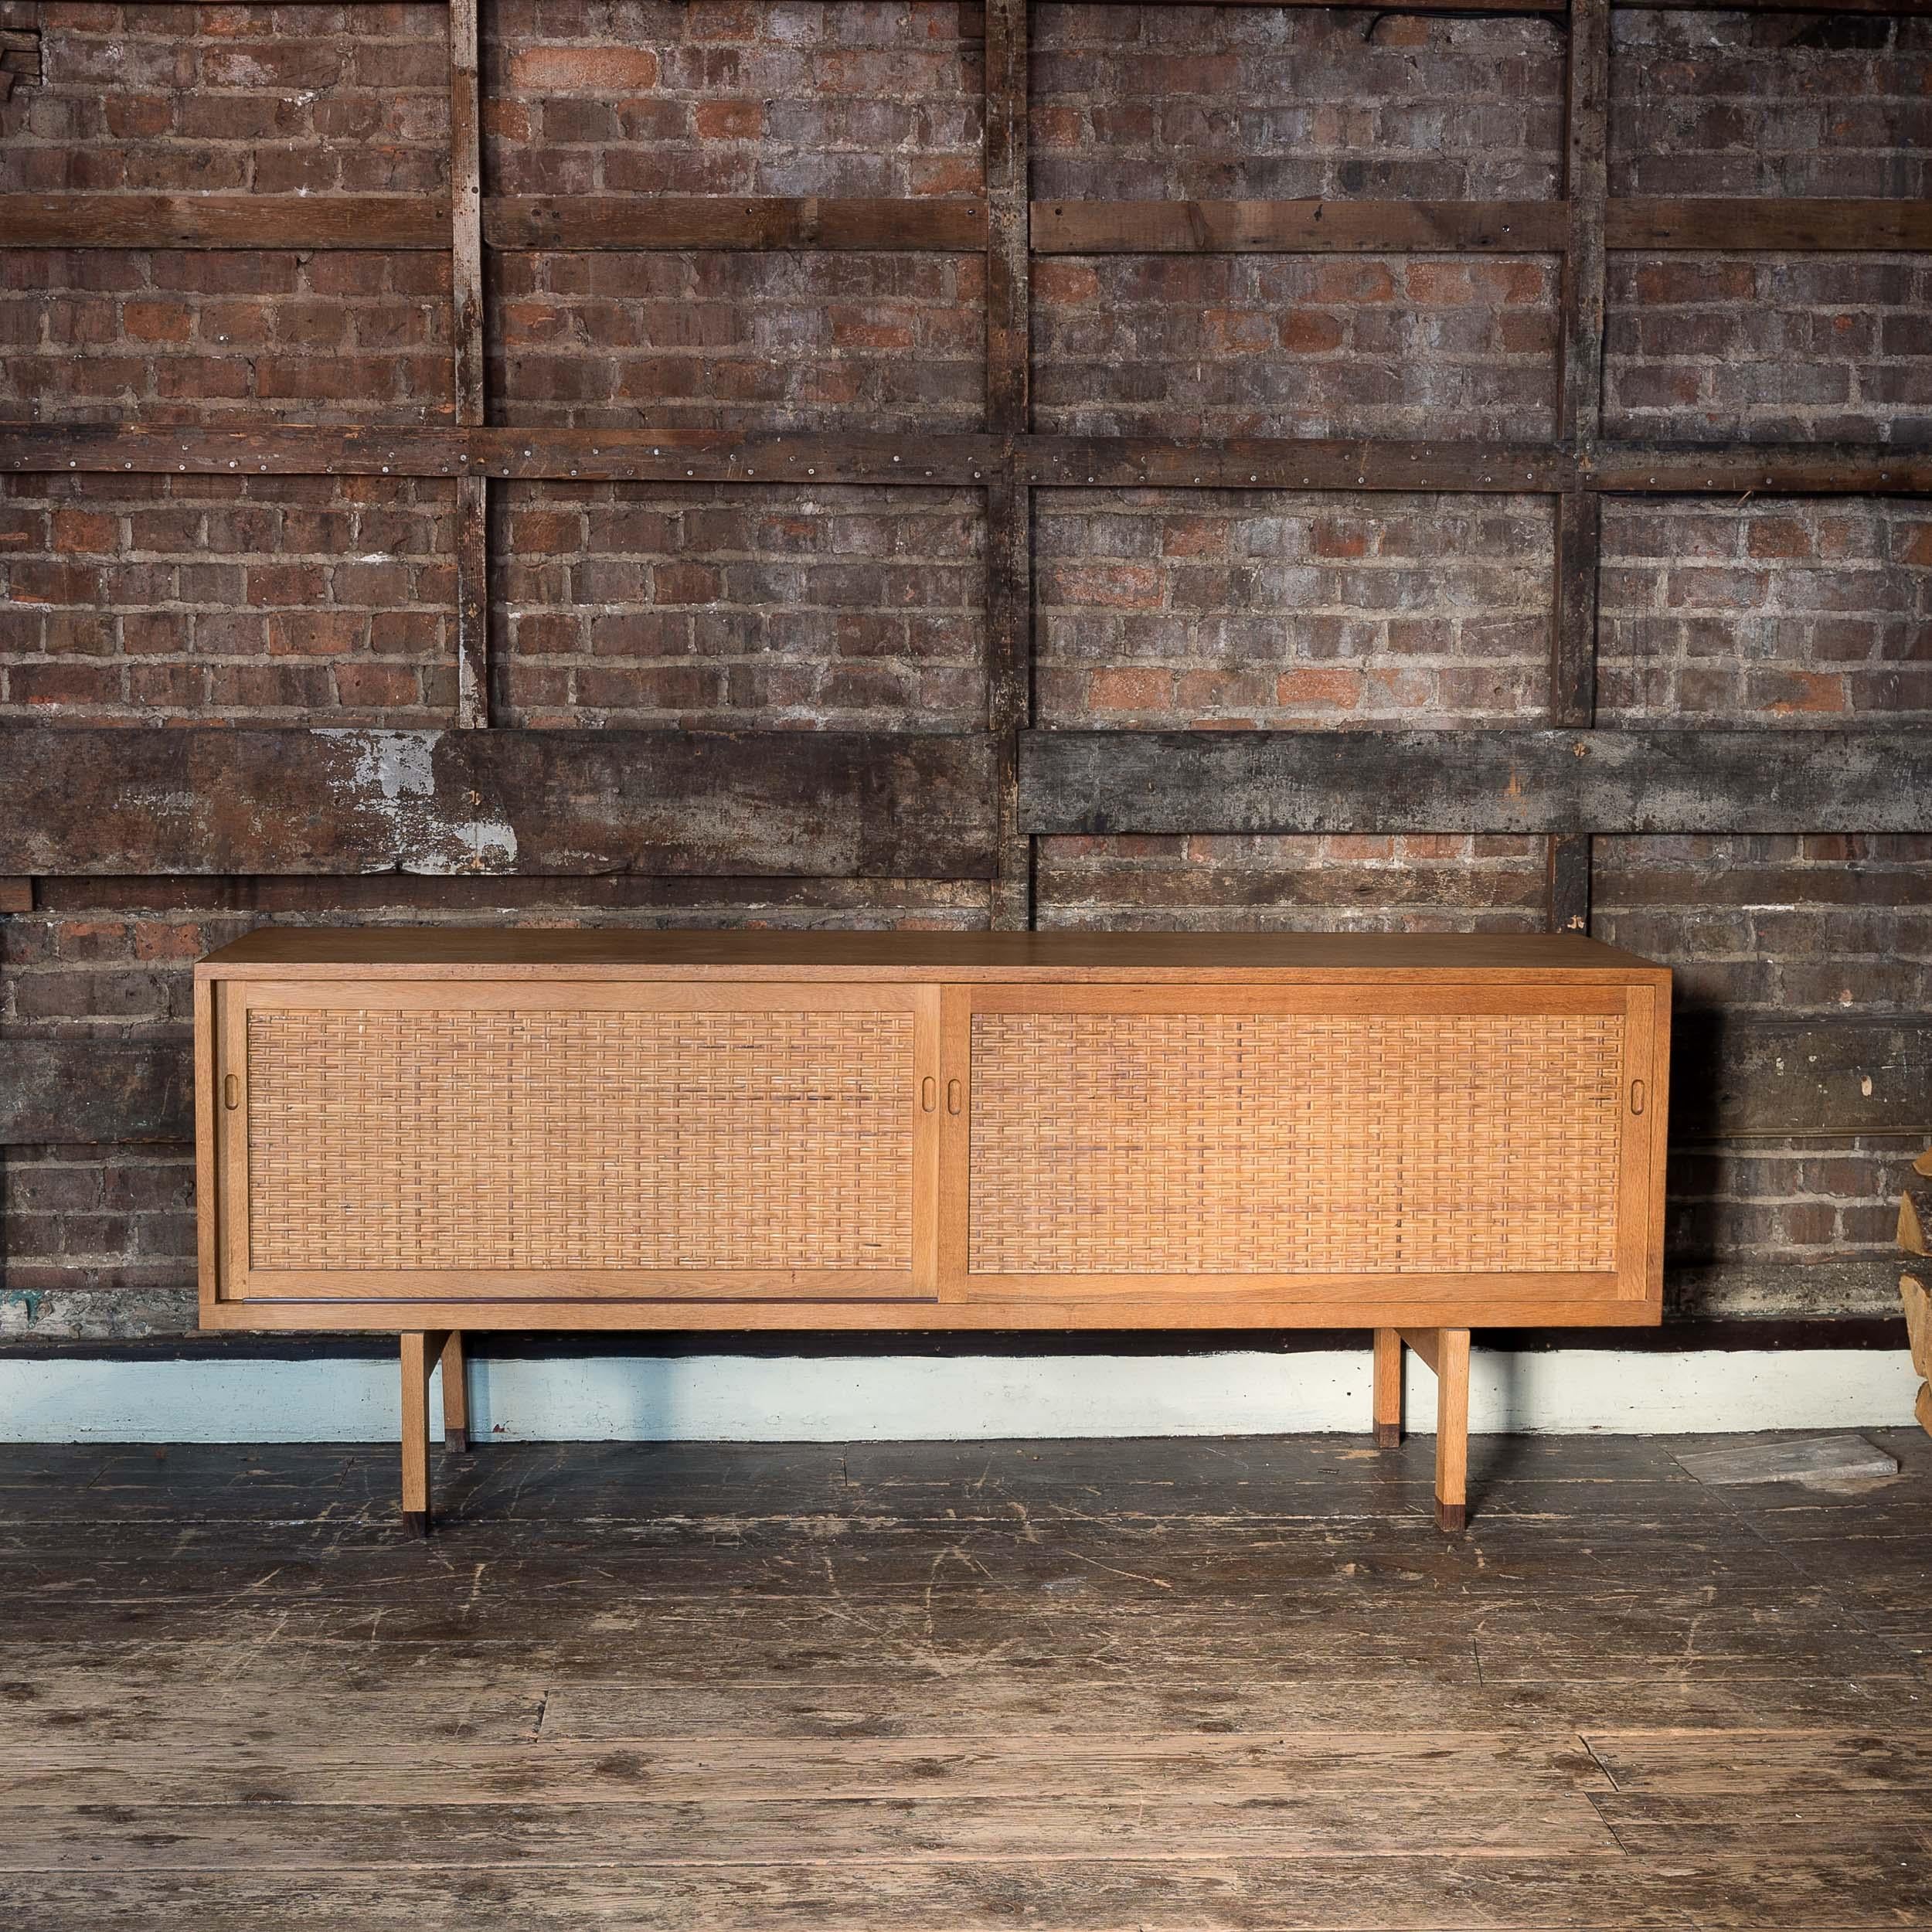 A Hans Wegner RY26 sideboard, manufactured by RY Møbler, mid-1950s.

Oak construction with rattan fronts to the sliding cabinet doors, the interior fitted with adjustable shelving and slides, with interior disc 'DANISH FURNITUREMAKERS CONTROL' .